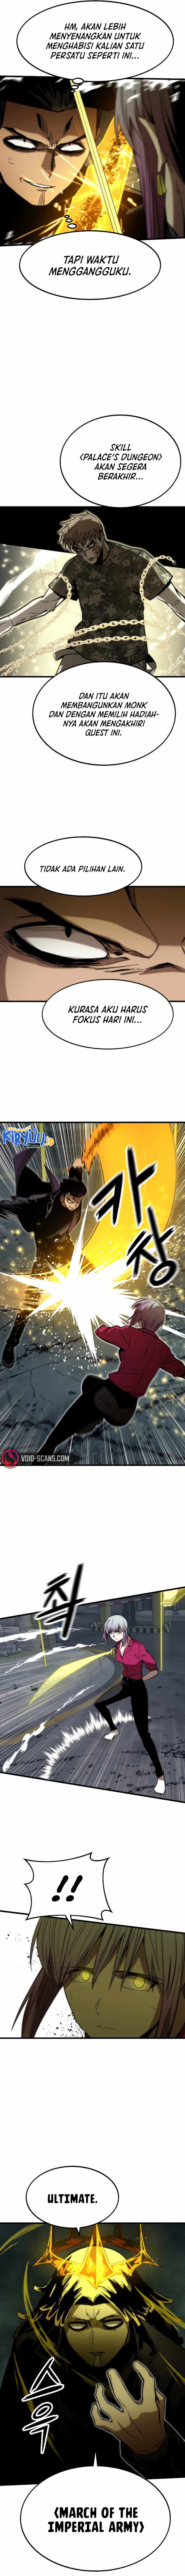 Ultra Alter Chapter 55